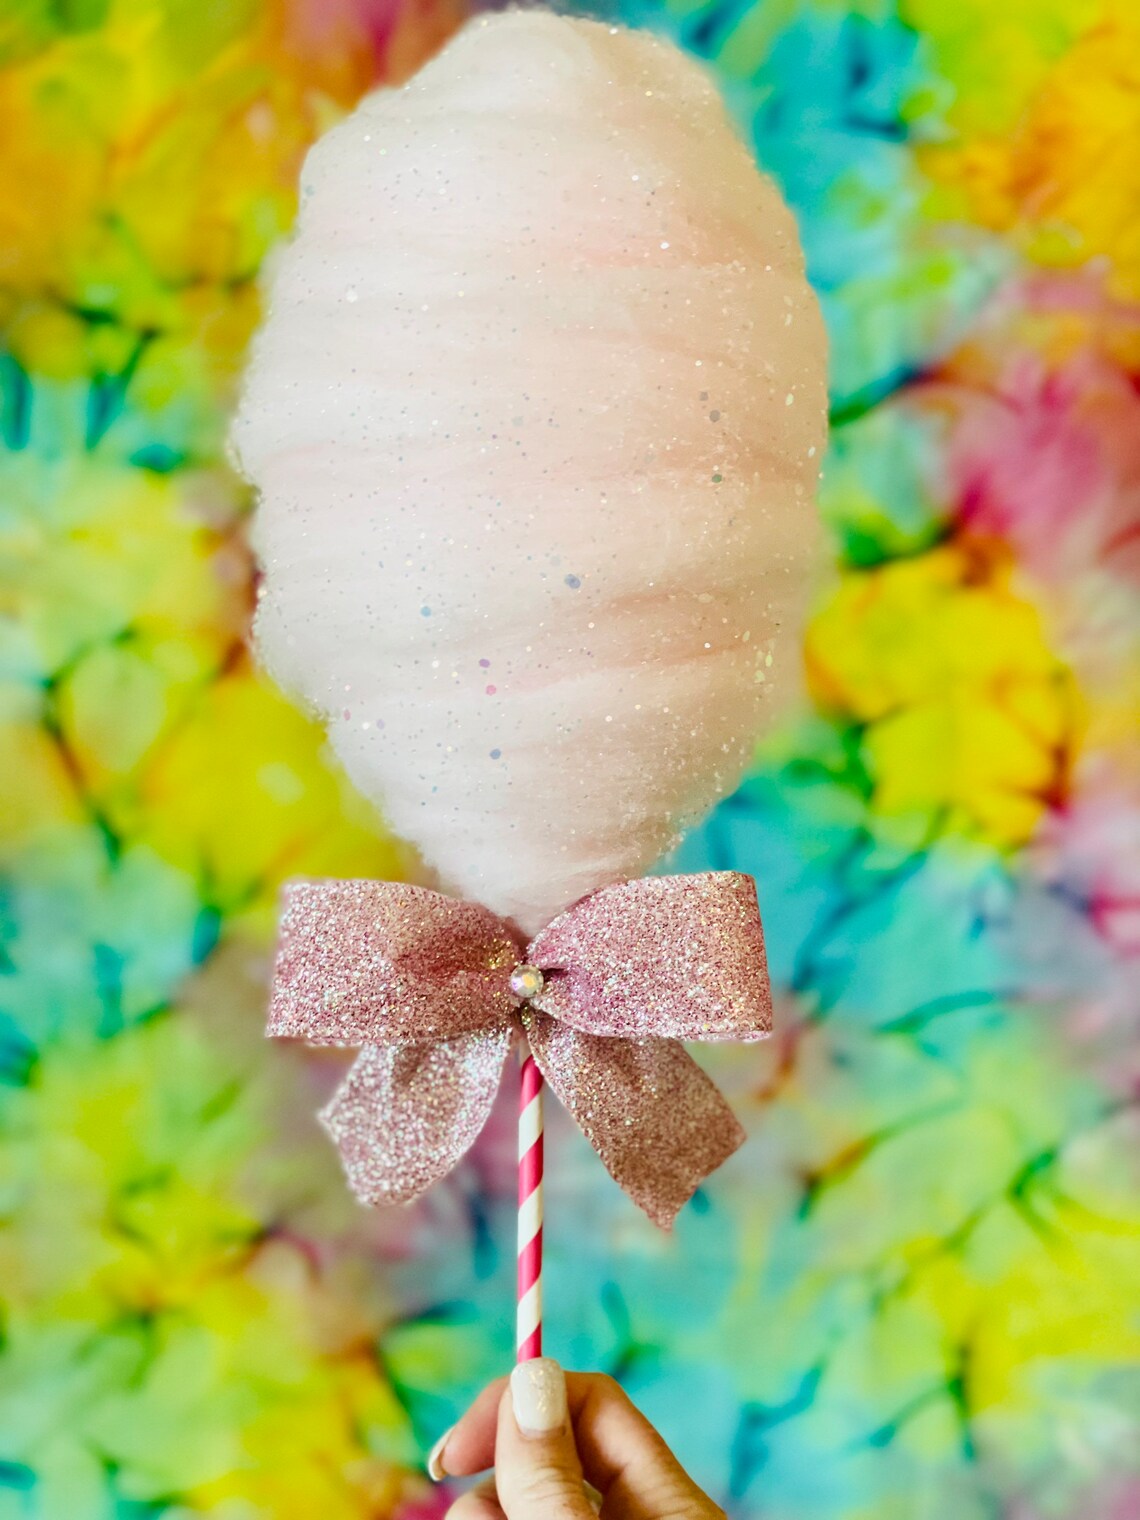 Extra Large Cotton Candy Fake Cotton Candy Glittered Cotton - Etsy